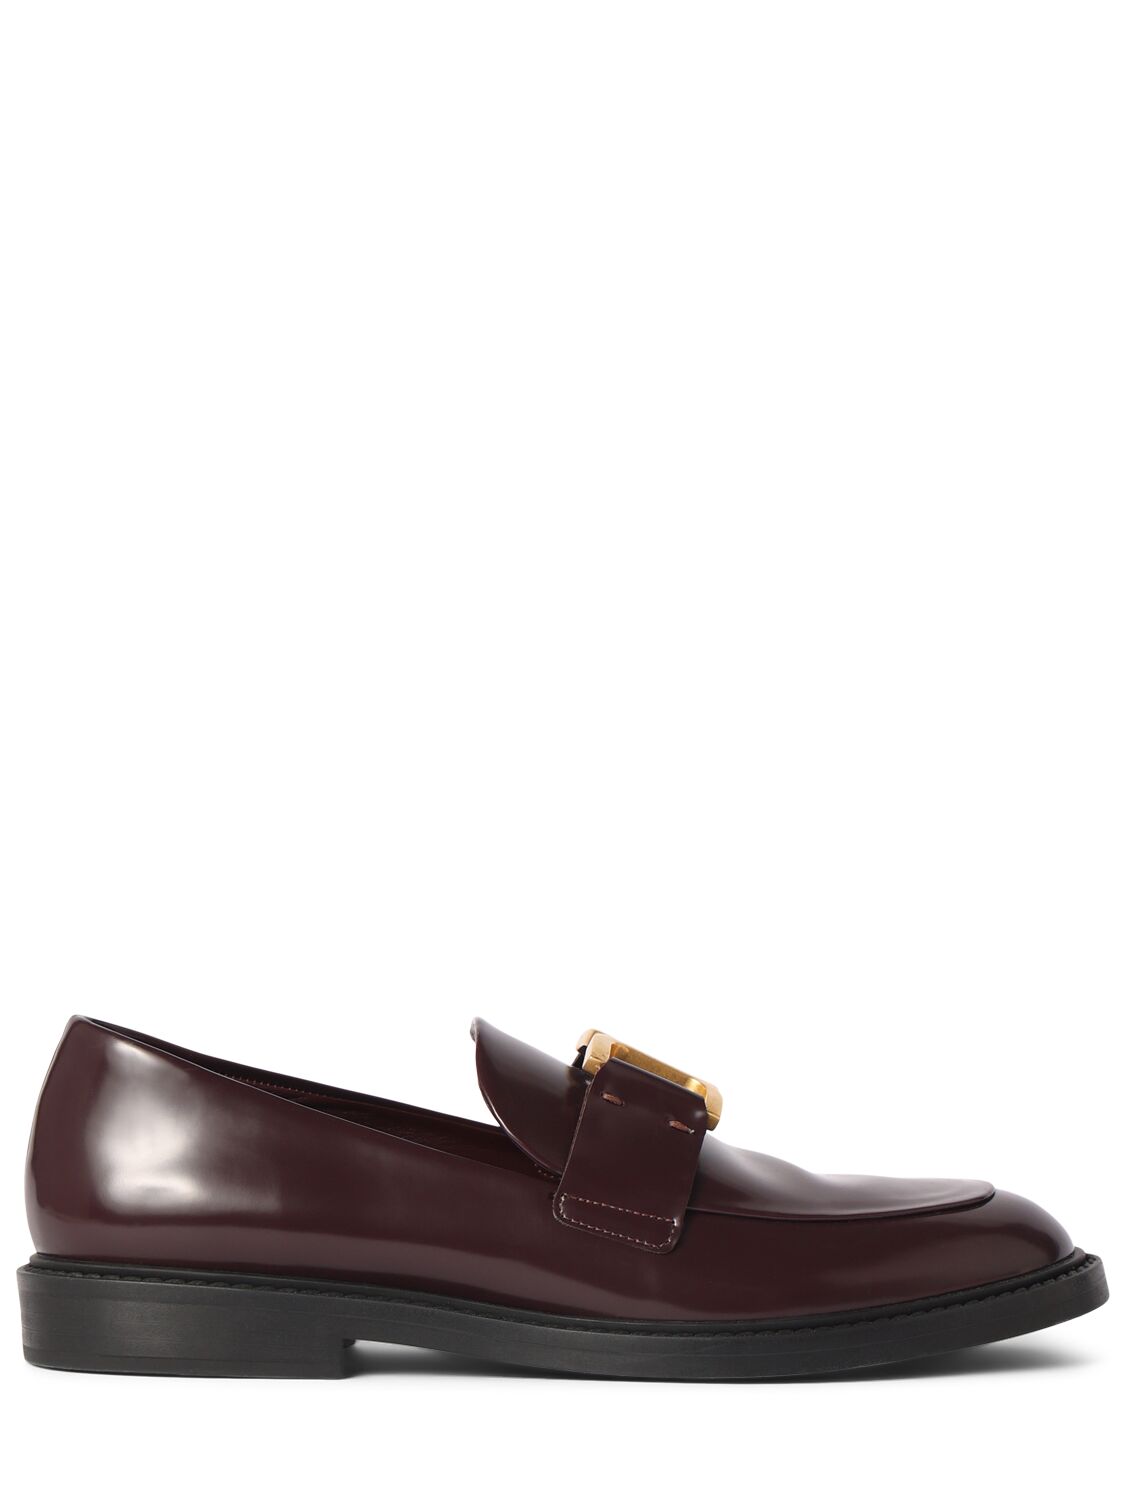 Chloé 10mm Marcie Brushed Leather Loafers In Ruby